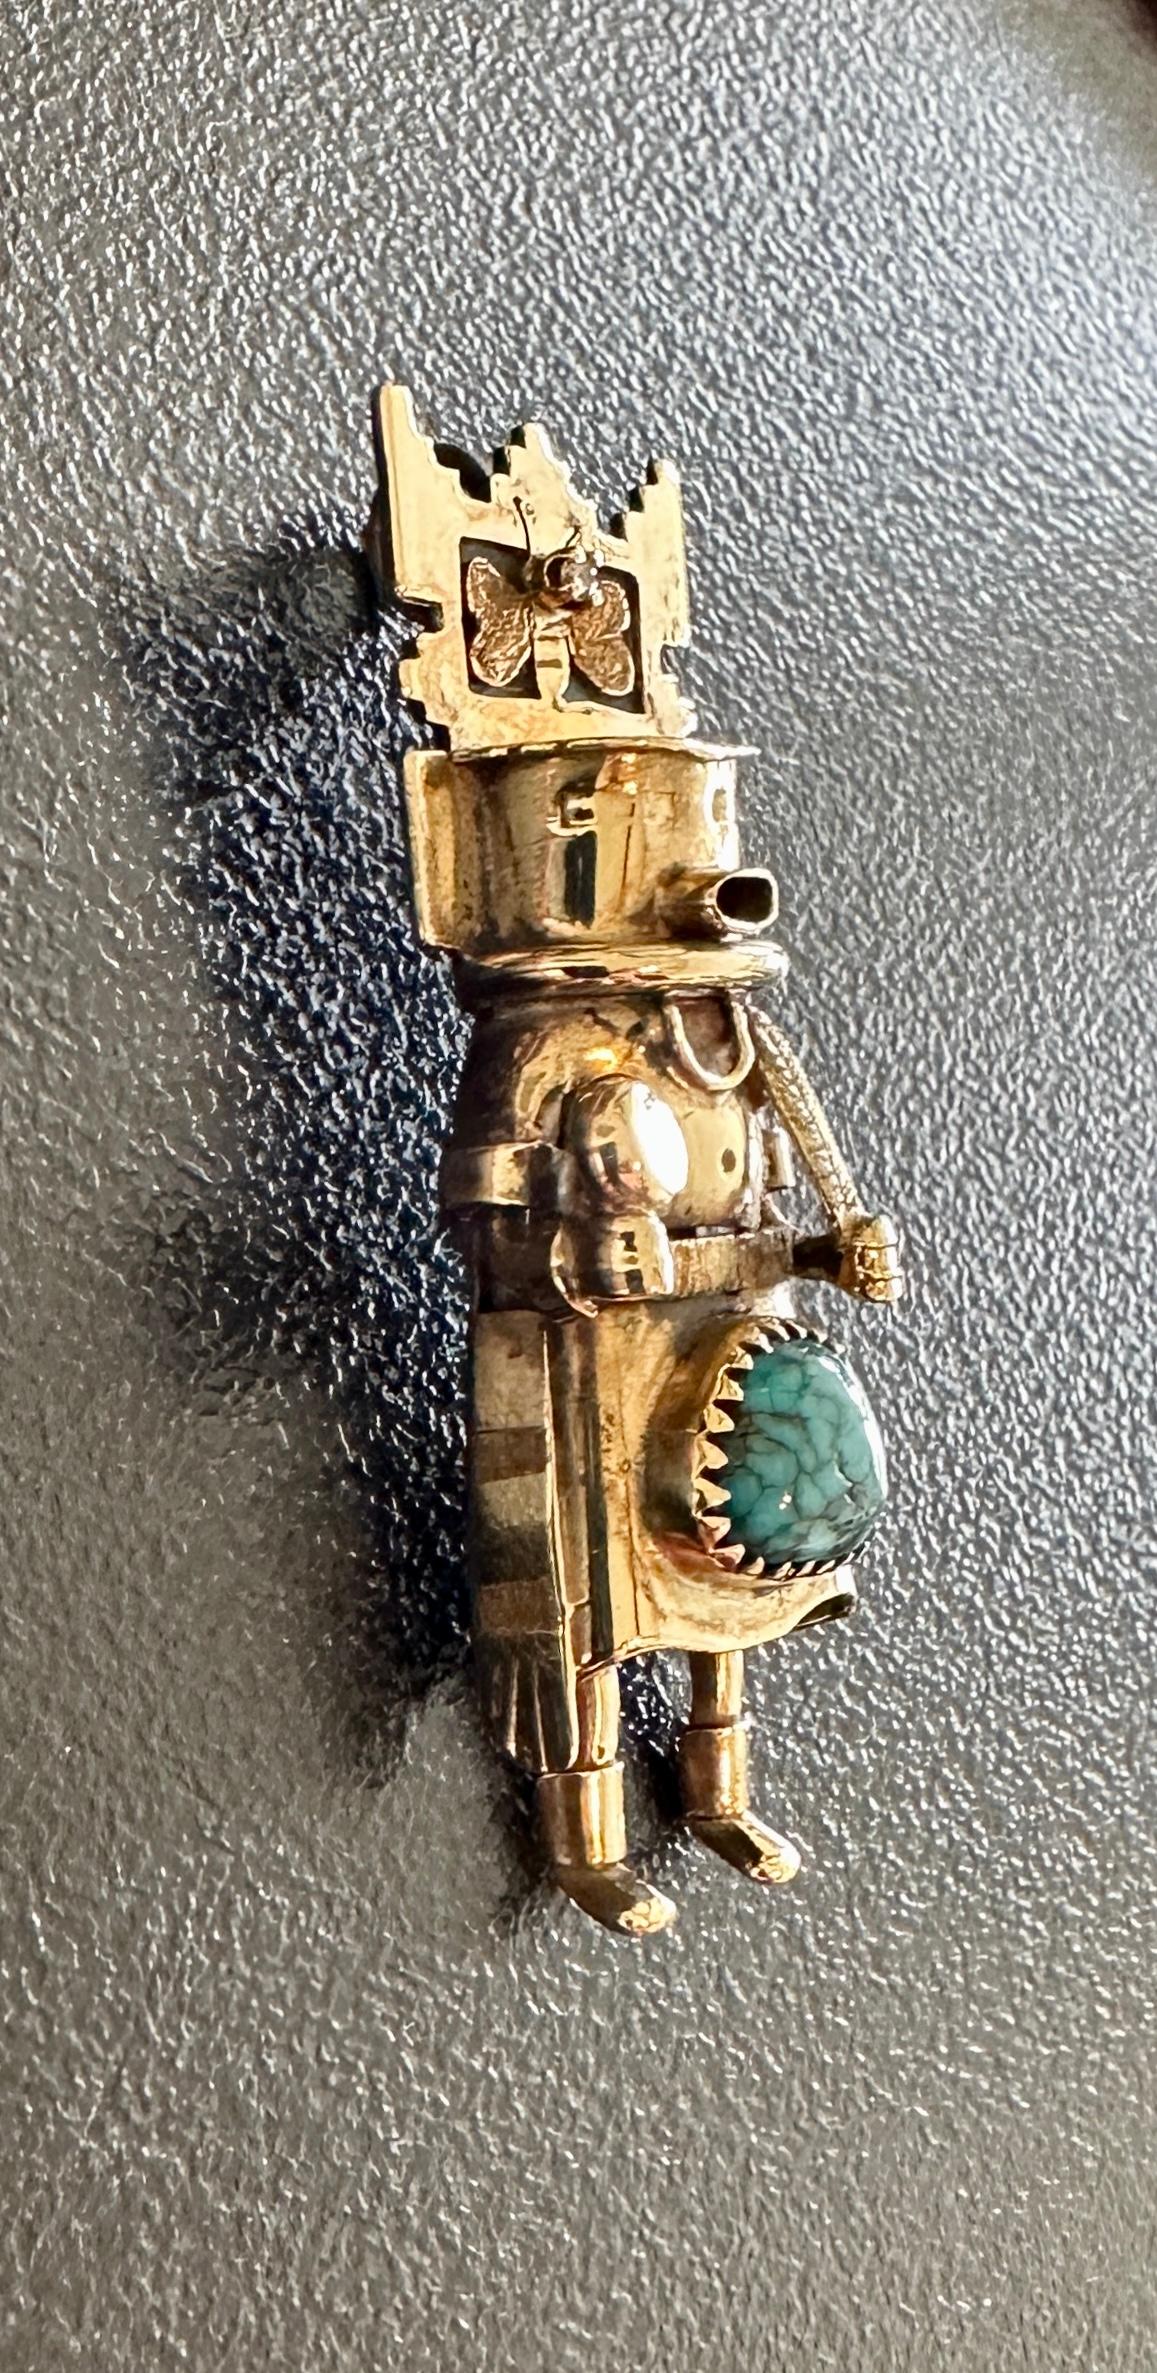 THIS IS A MAGNIFICENT AND RARE KATSINA, KACHINA PENDANT BY THE RENOWNED YAQUI NATIVE AMERICAN INDIAN ARTIST MICHAEL HORSE.   THE RARE JEWEL IS 14 KARAT YELLOW GOLD WITH A DIAMOND SET IN THE BUTTERFLY HEADDRESS AND A STUNNING TURQUOISE GEM IN THE